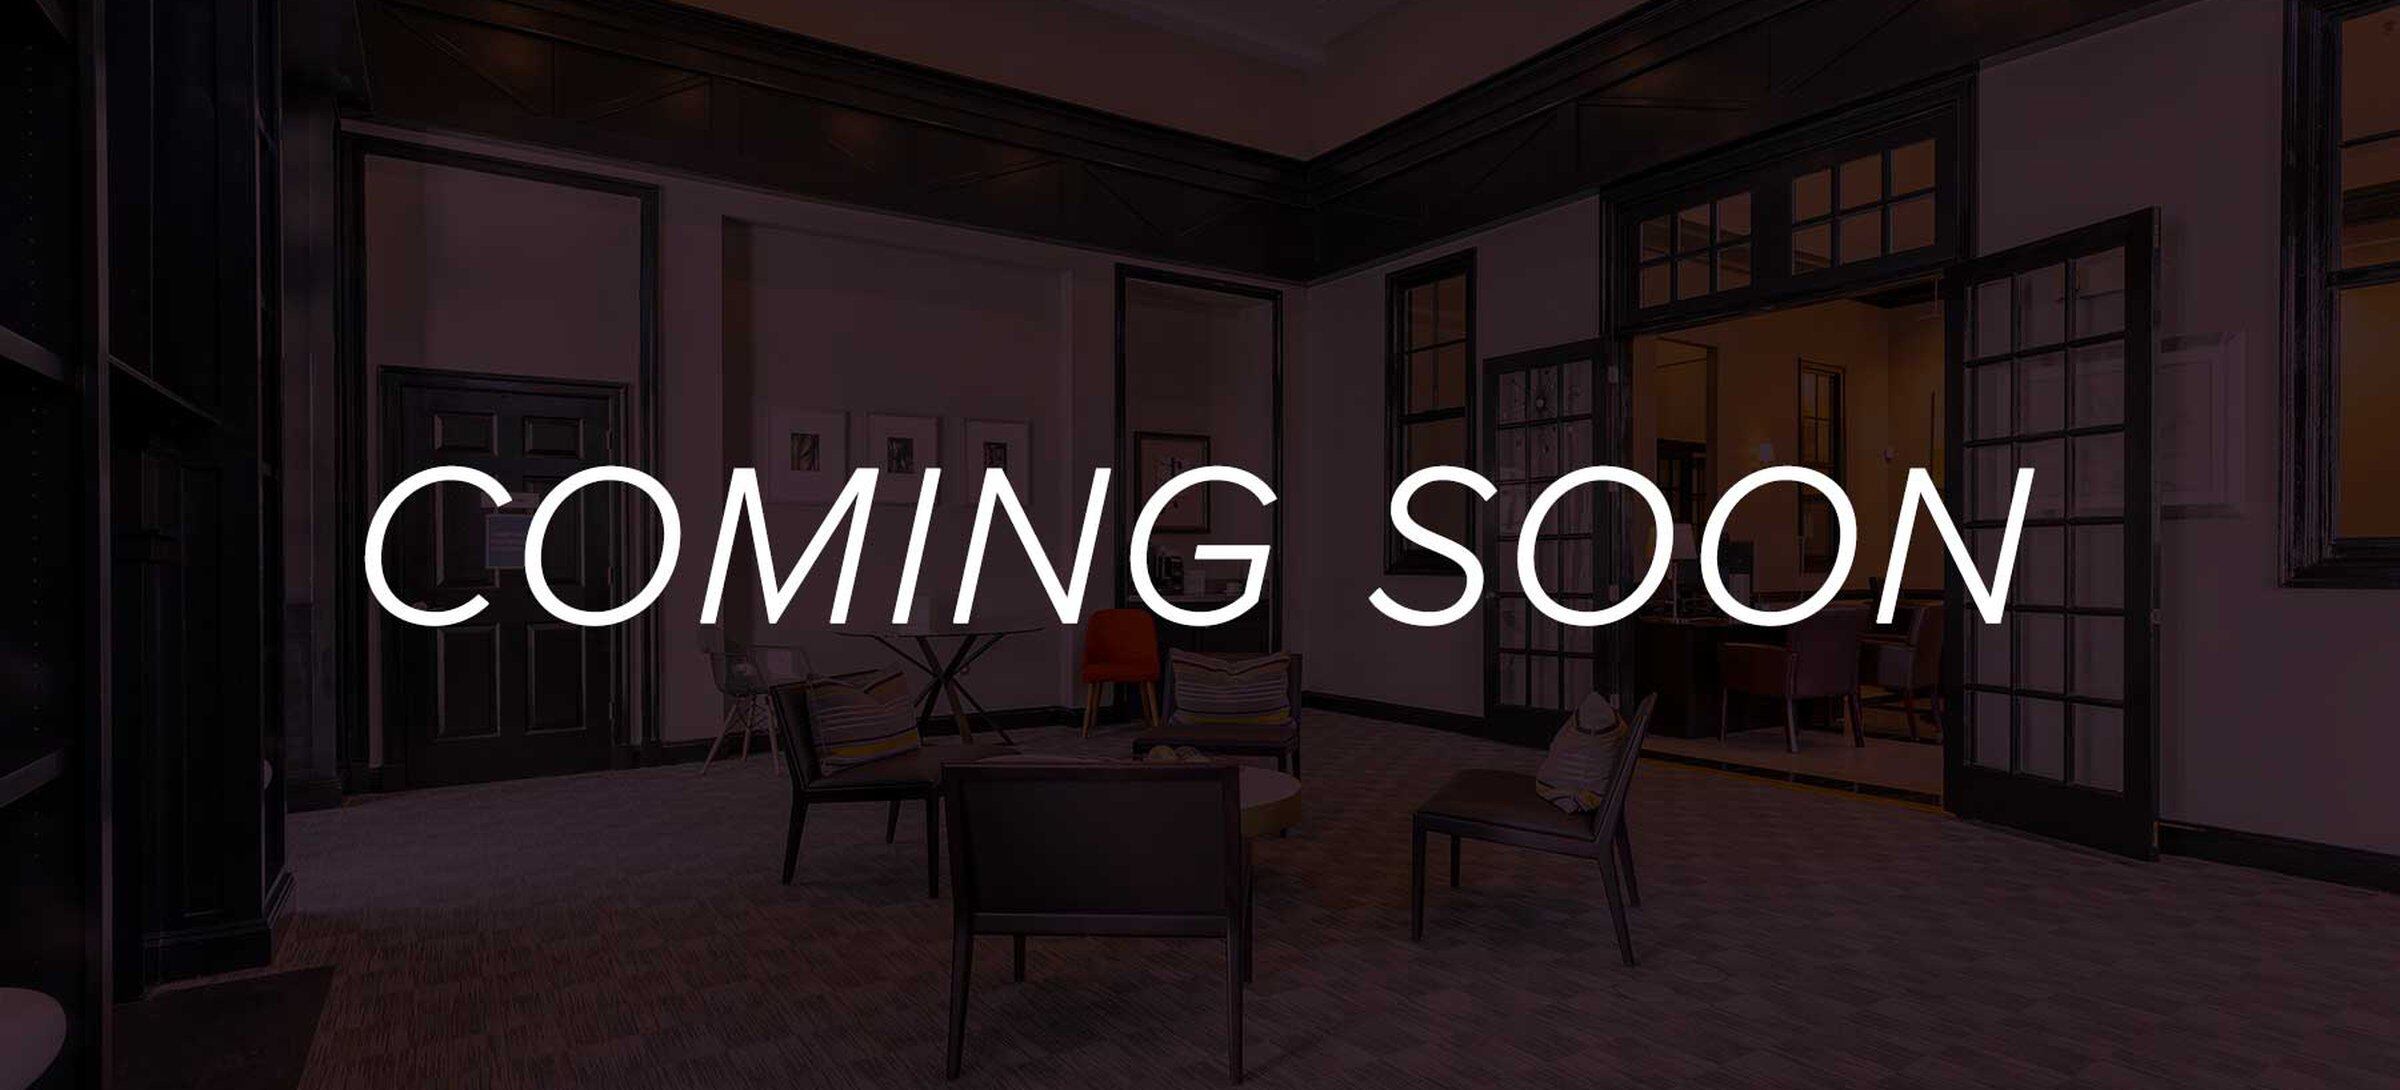 Coming soon - Renovated lounge with modern flooring and finishes